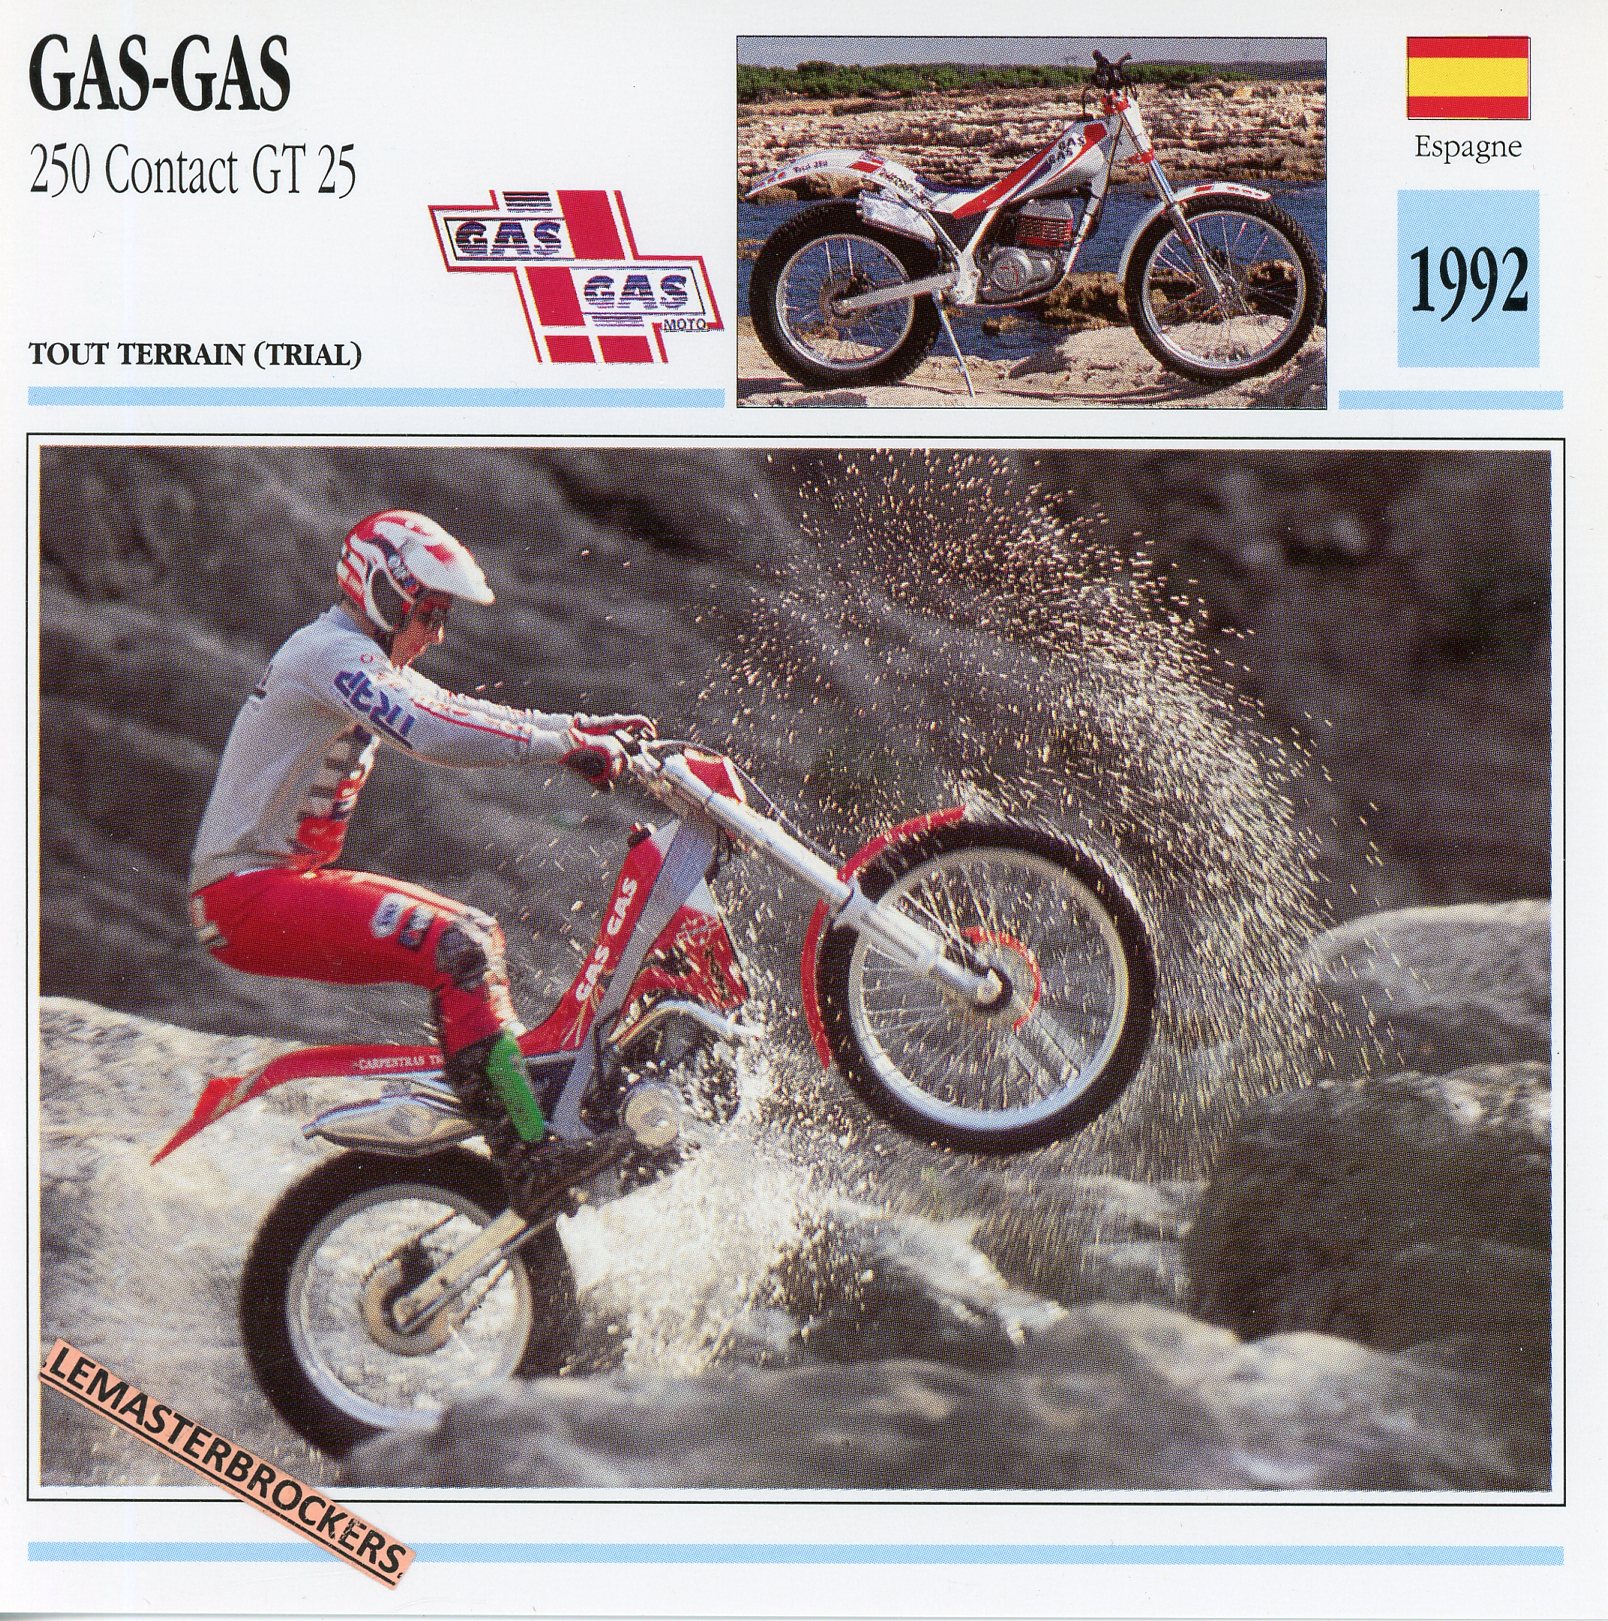 GASGAS-250-CONTACT-GT25-1992-LEMASTERBROCKERS-FICHE-MOTO-ATLAS-TRIAL-COLLECTION-CARD